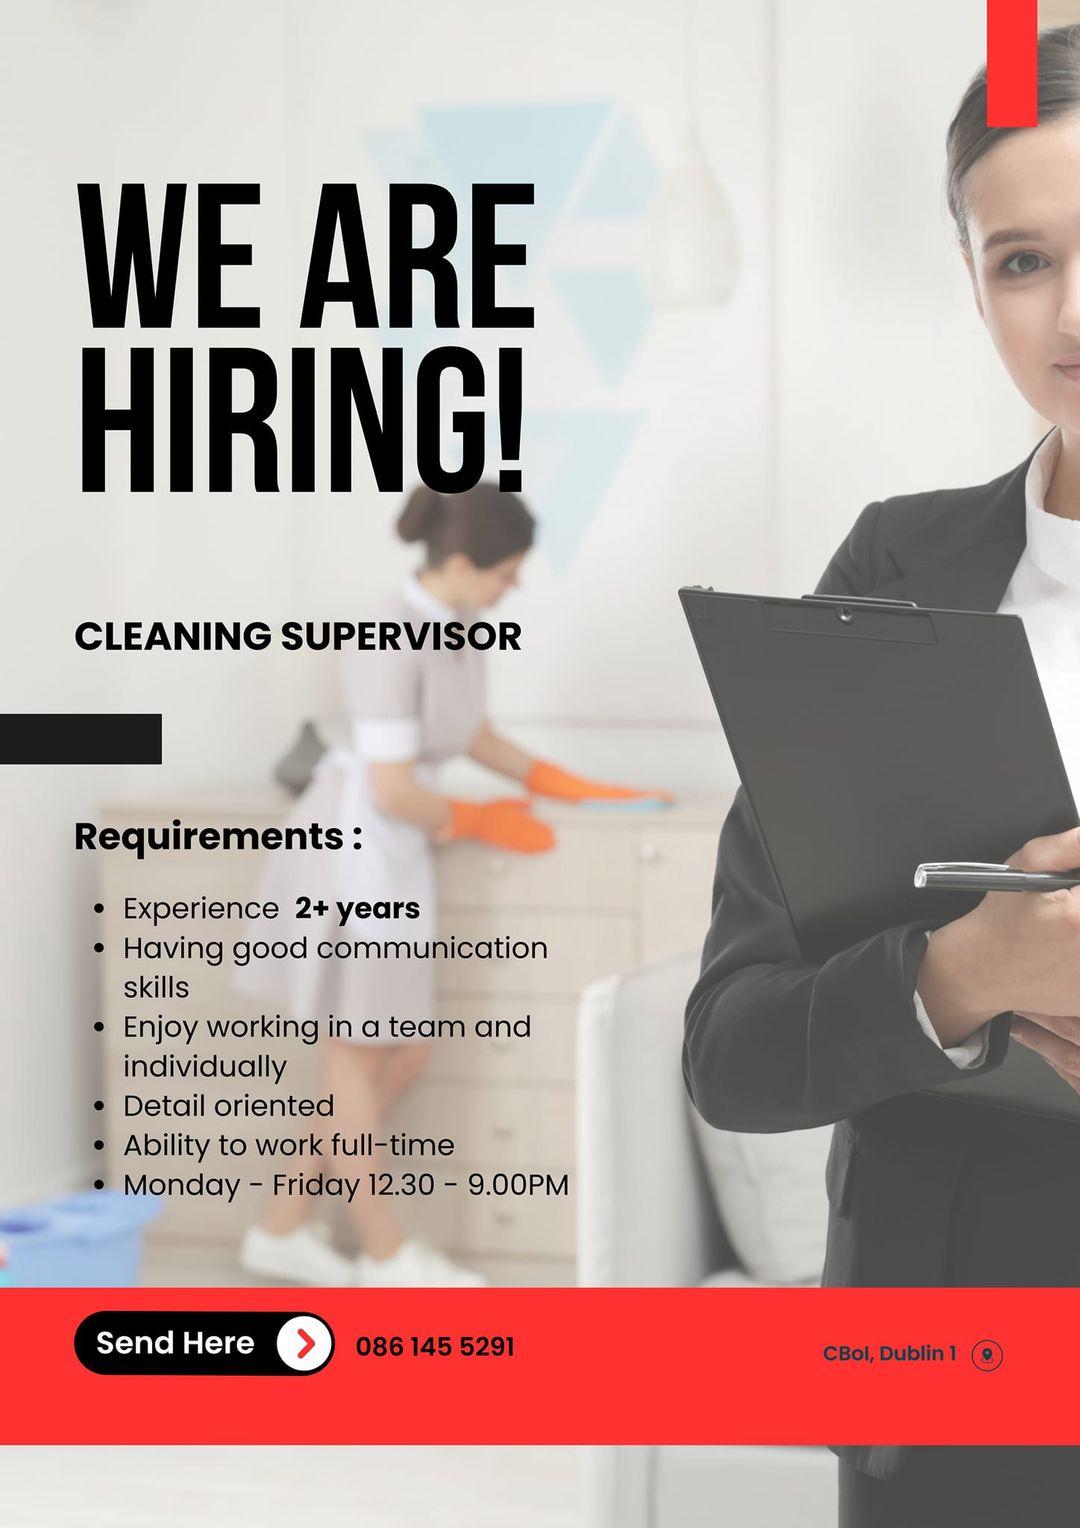 Cleaning supervisor needed